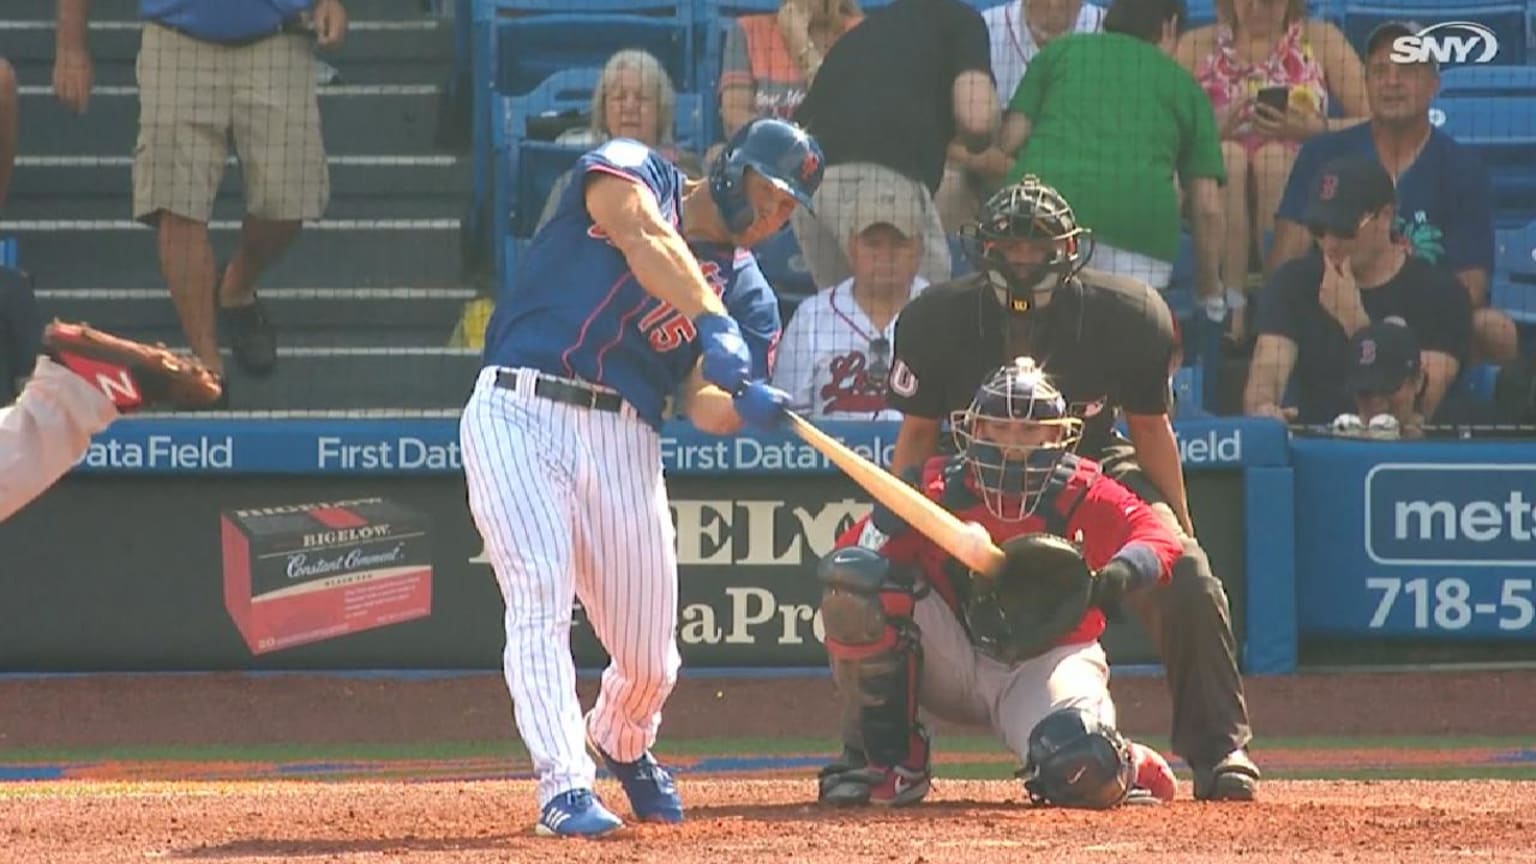 Mets: Tim Tebow hit a spring training home run off an MLB reliever